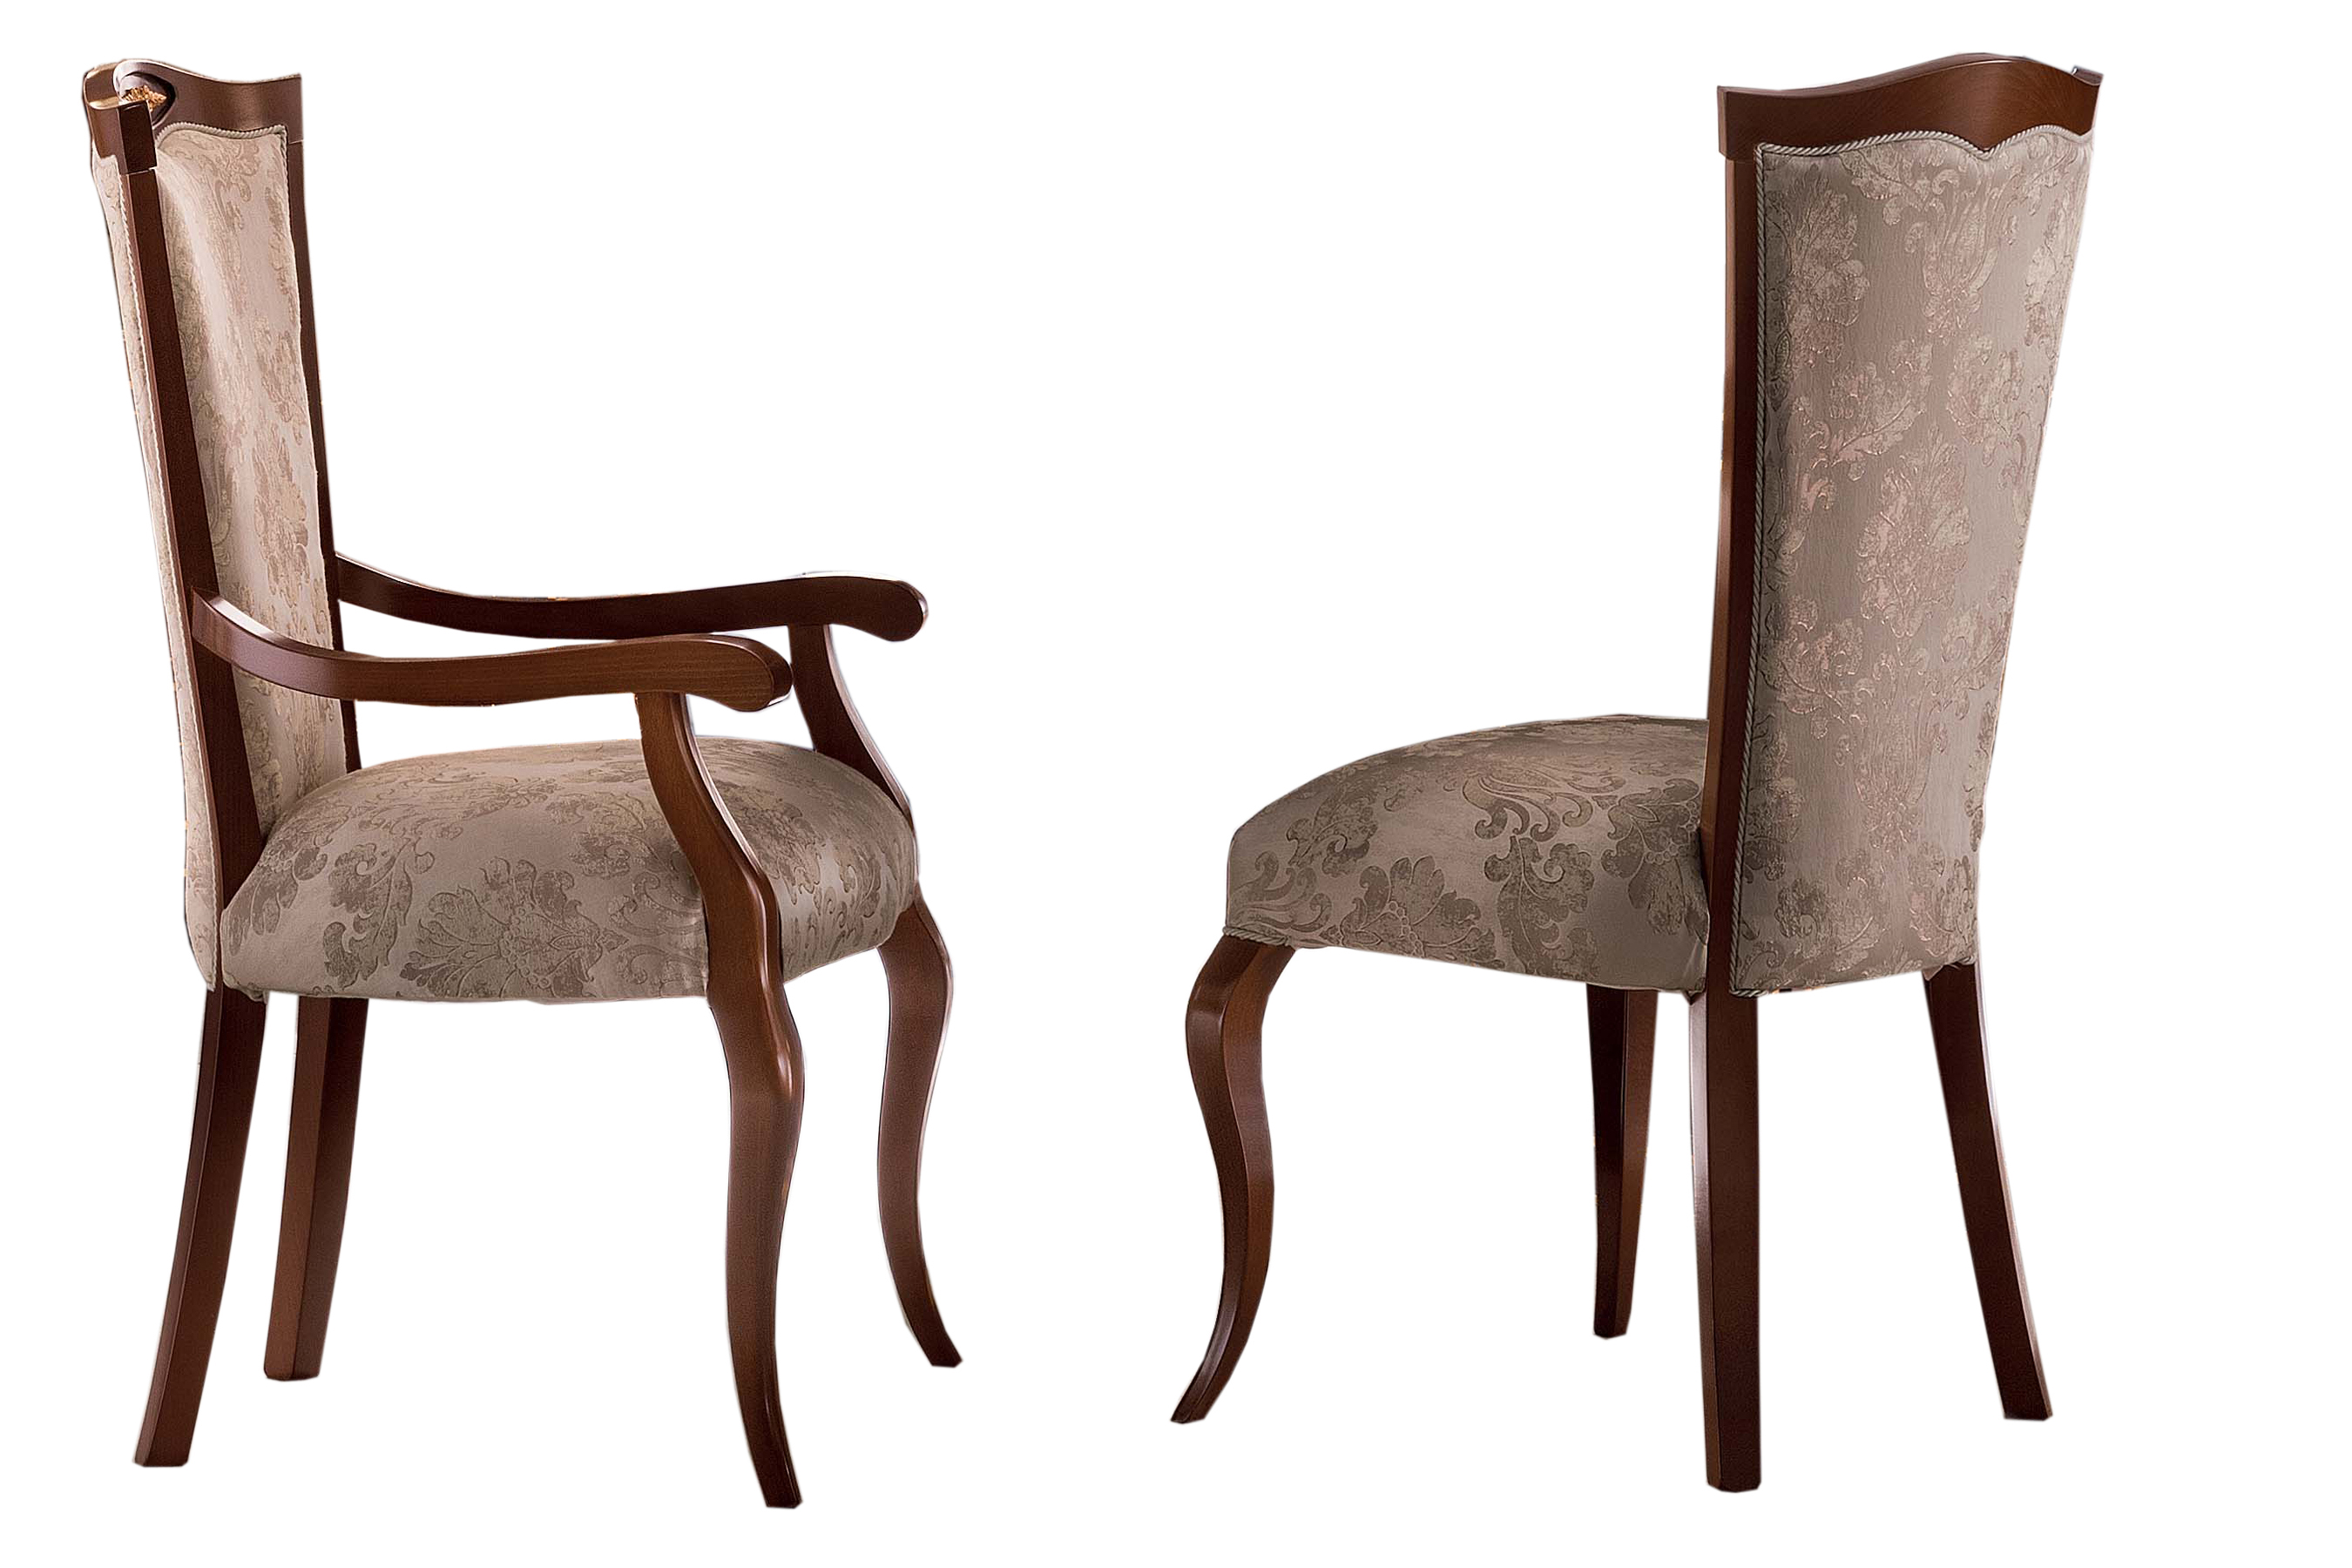 Brands Arredoclassic Living Room, Italy Modigliani Chair by Arredoclassic